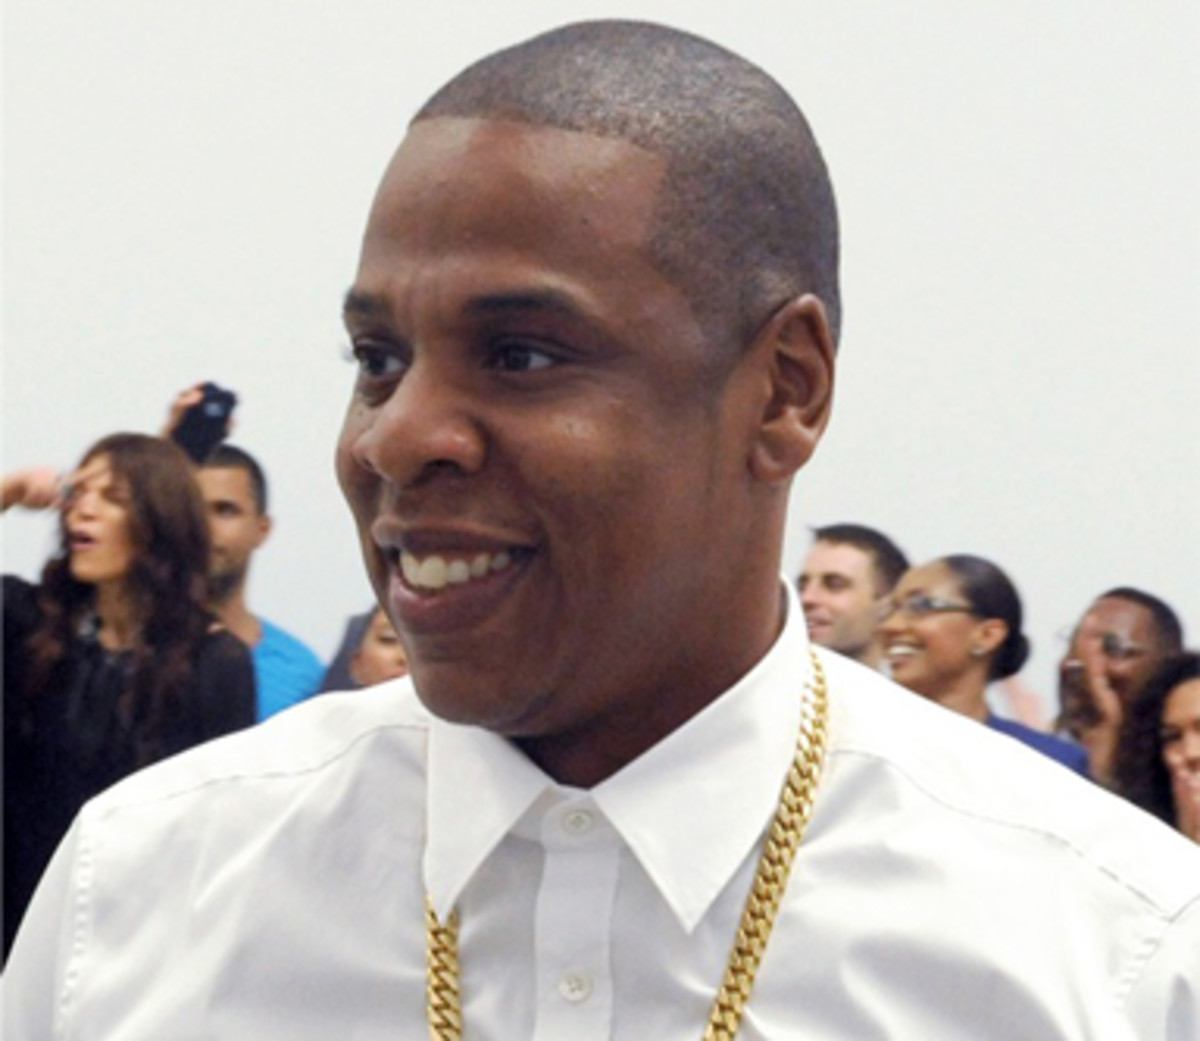 Jay Z has launched his own clothing line